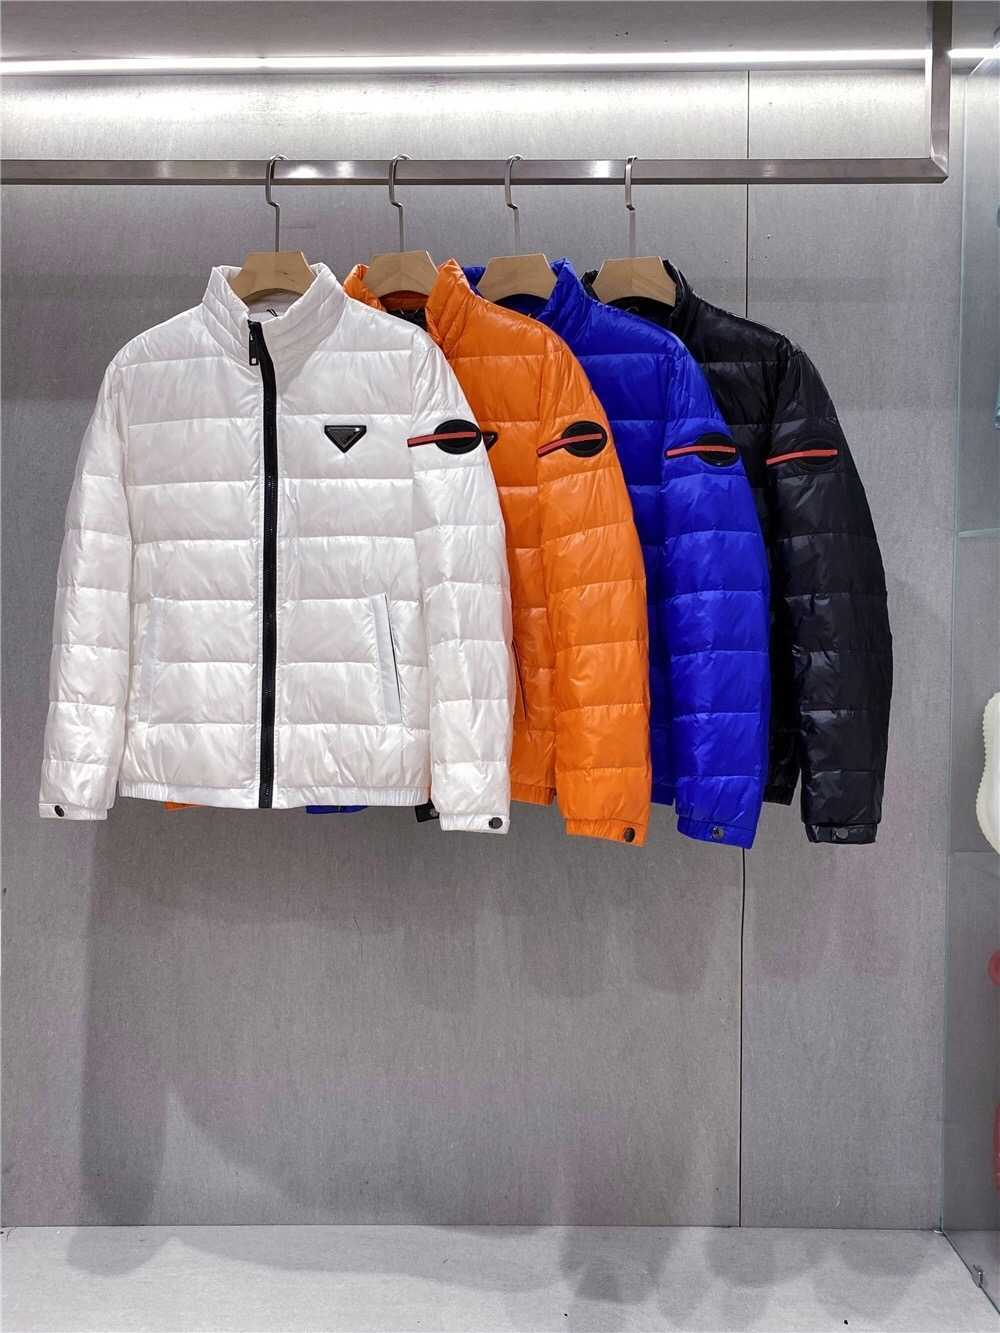 Autumn men's stand collar white duck down light light jacket, advanced straight velvet design, strong warmth, light and breathable without any odor.